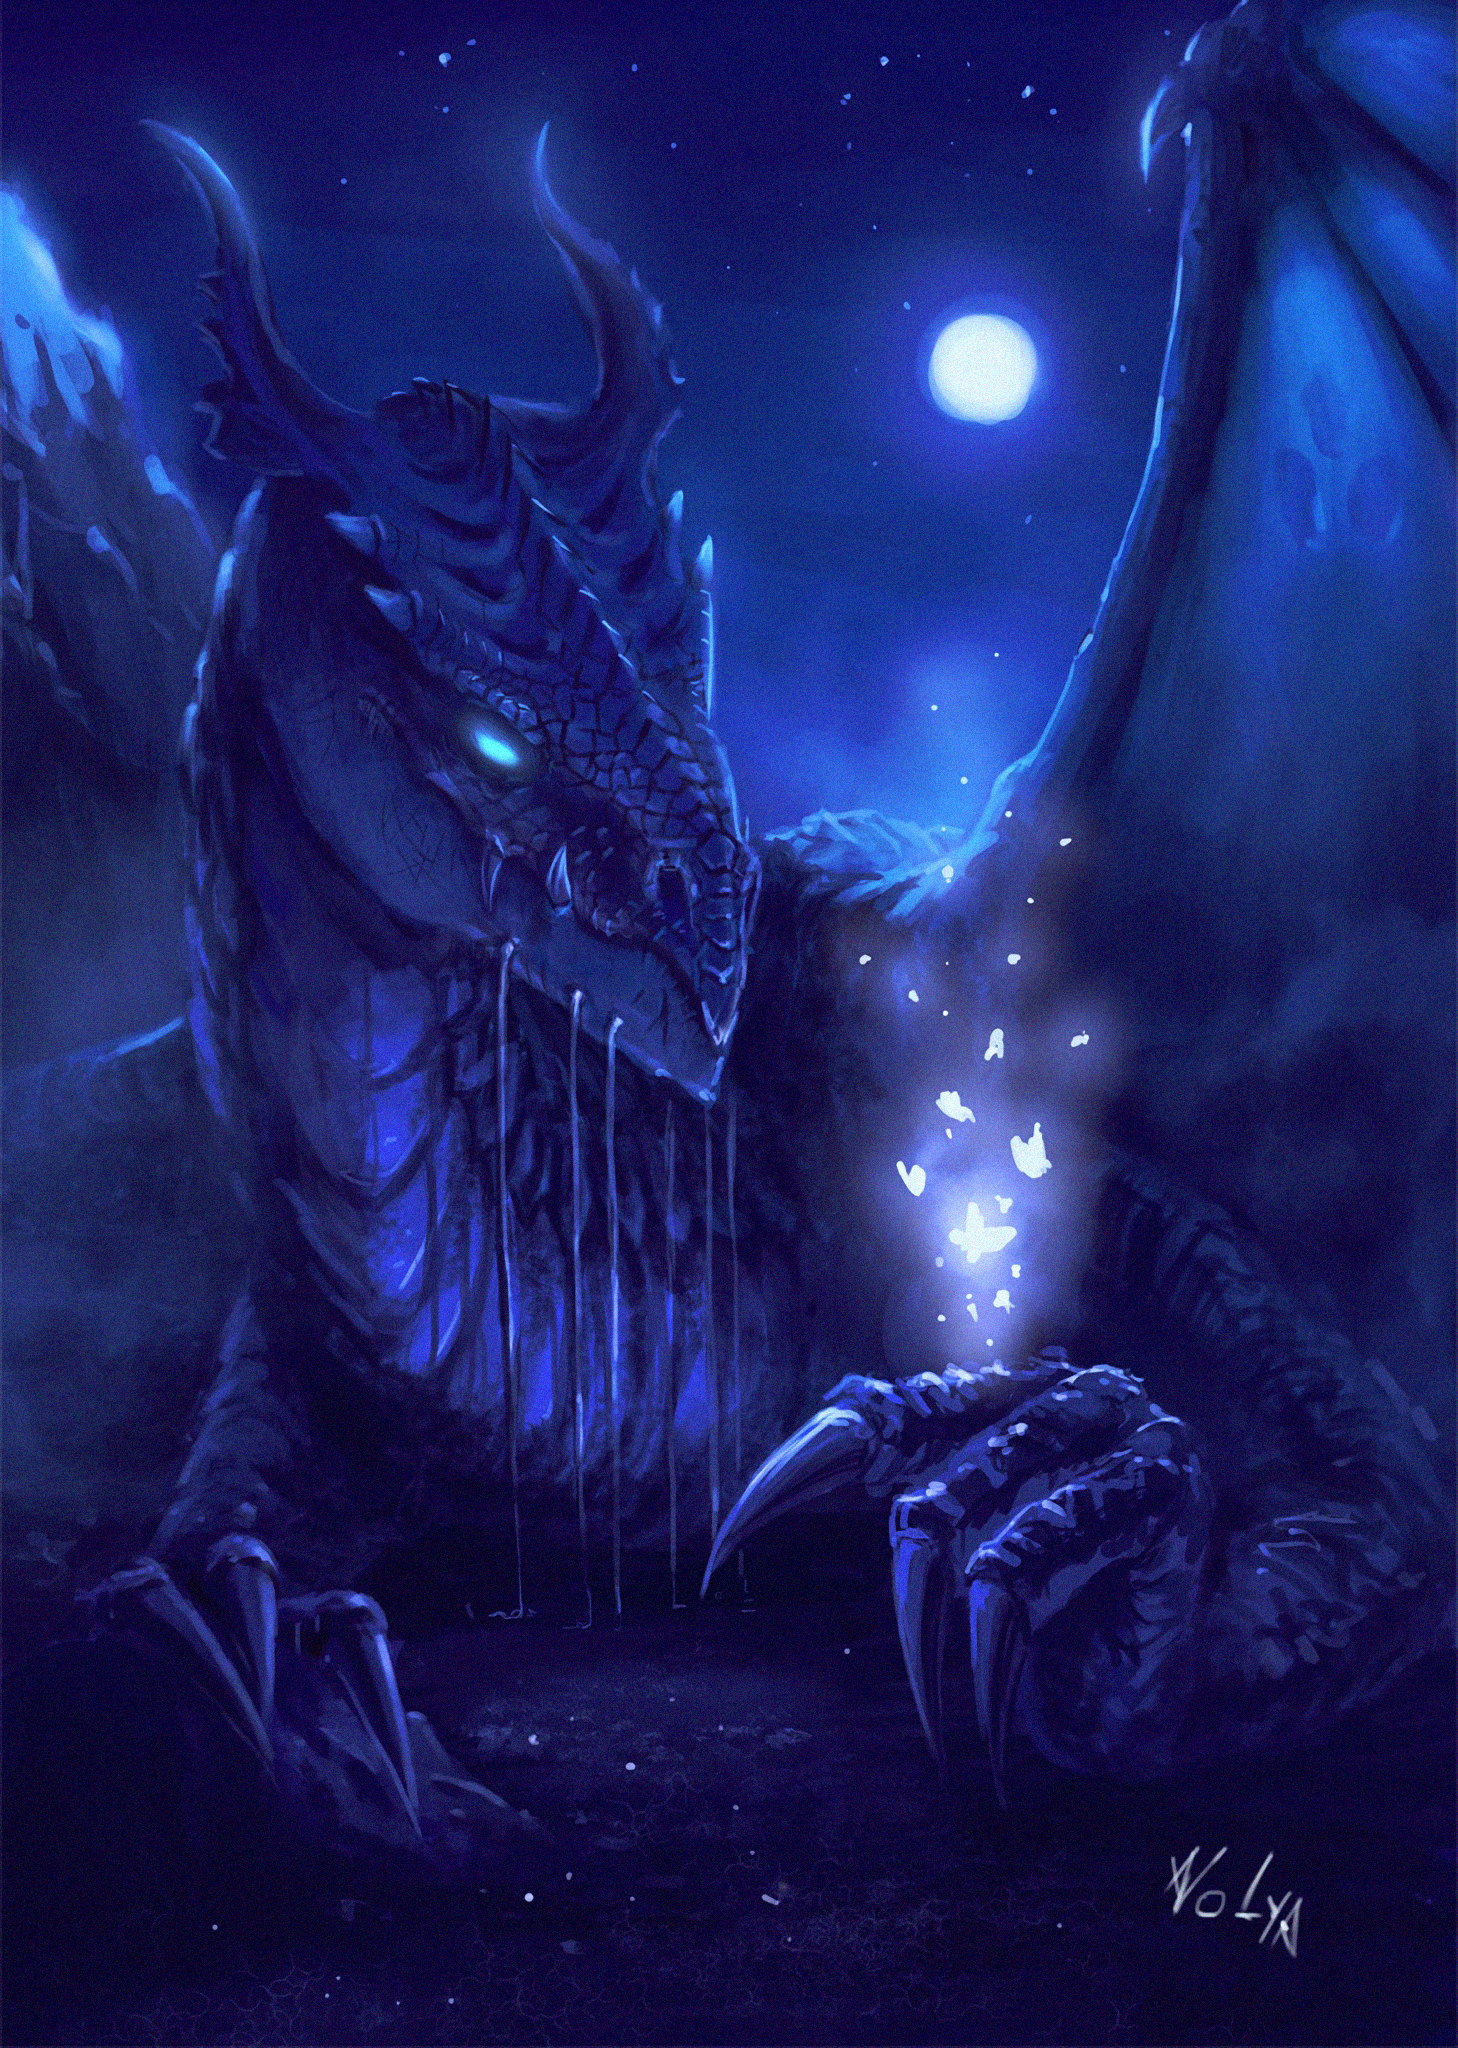 114700 Screensavers and Wallpapers Dragon for phone. Download art, night, dragon, being, creature, fantastic pictures for free